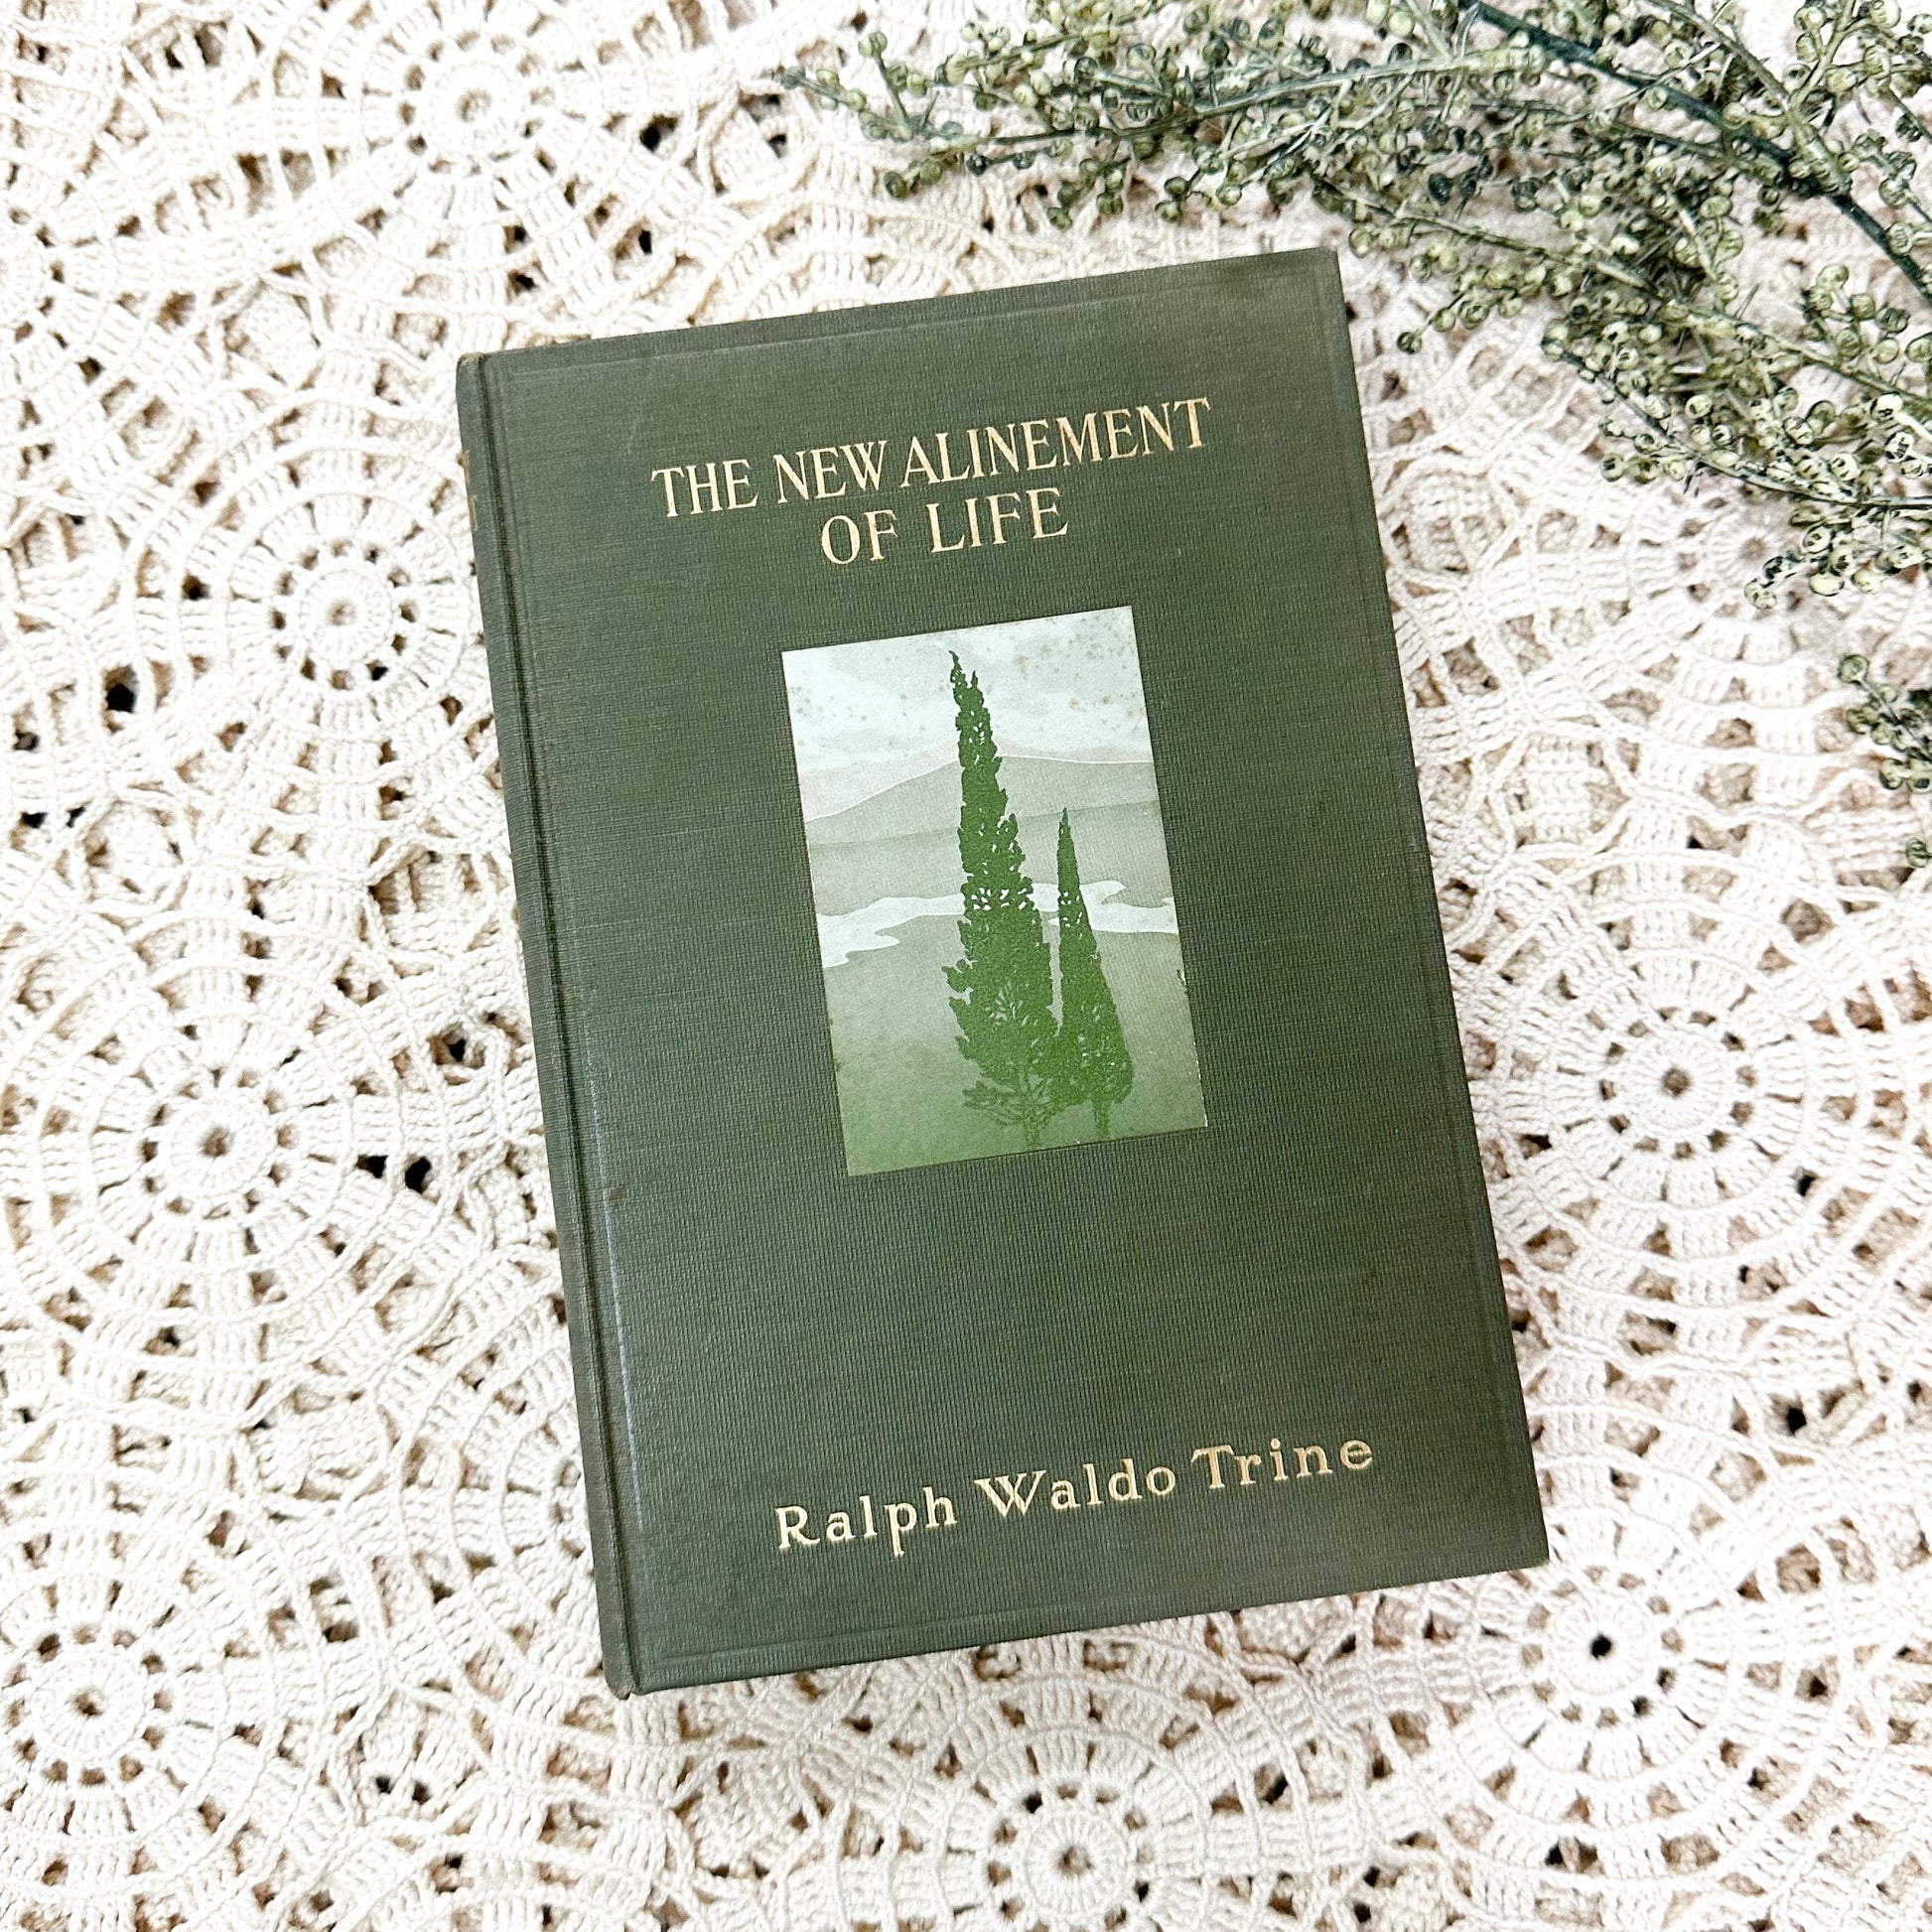 The New Alinement of Life by Ralph Waldo Trine